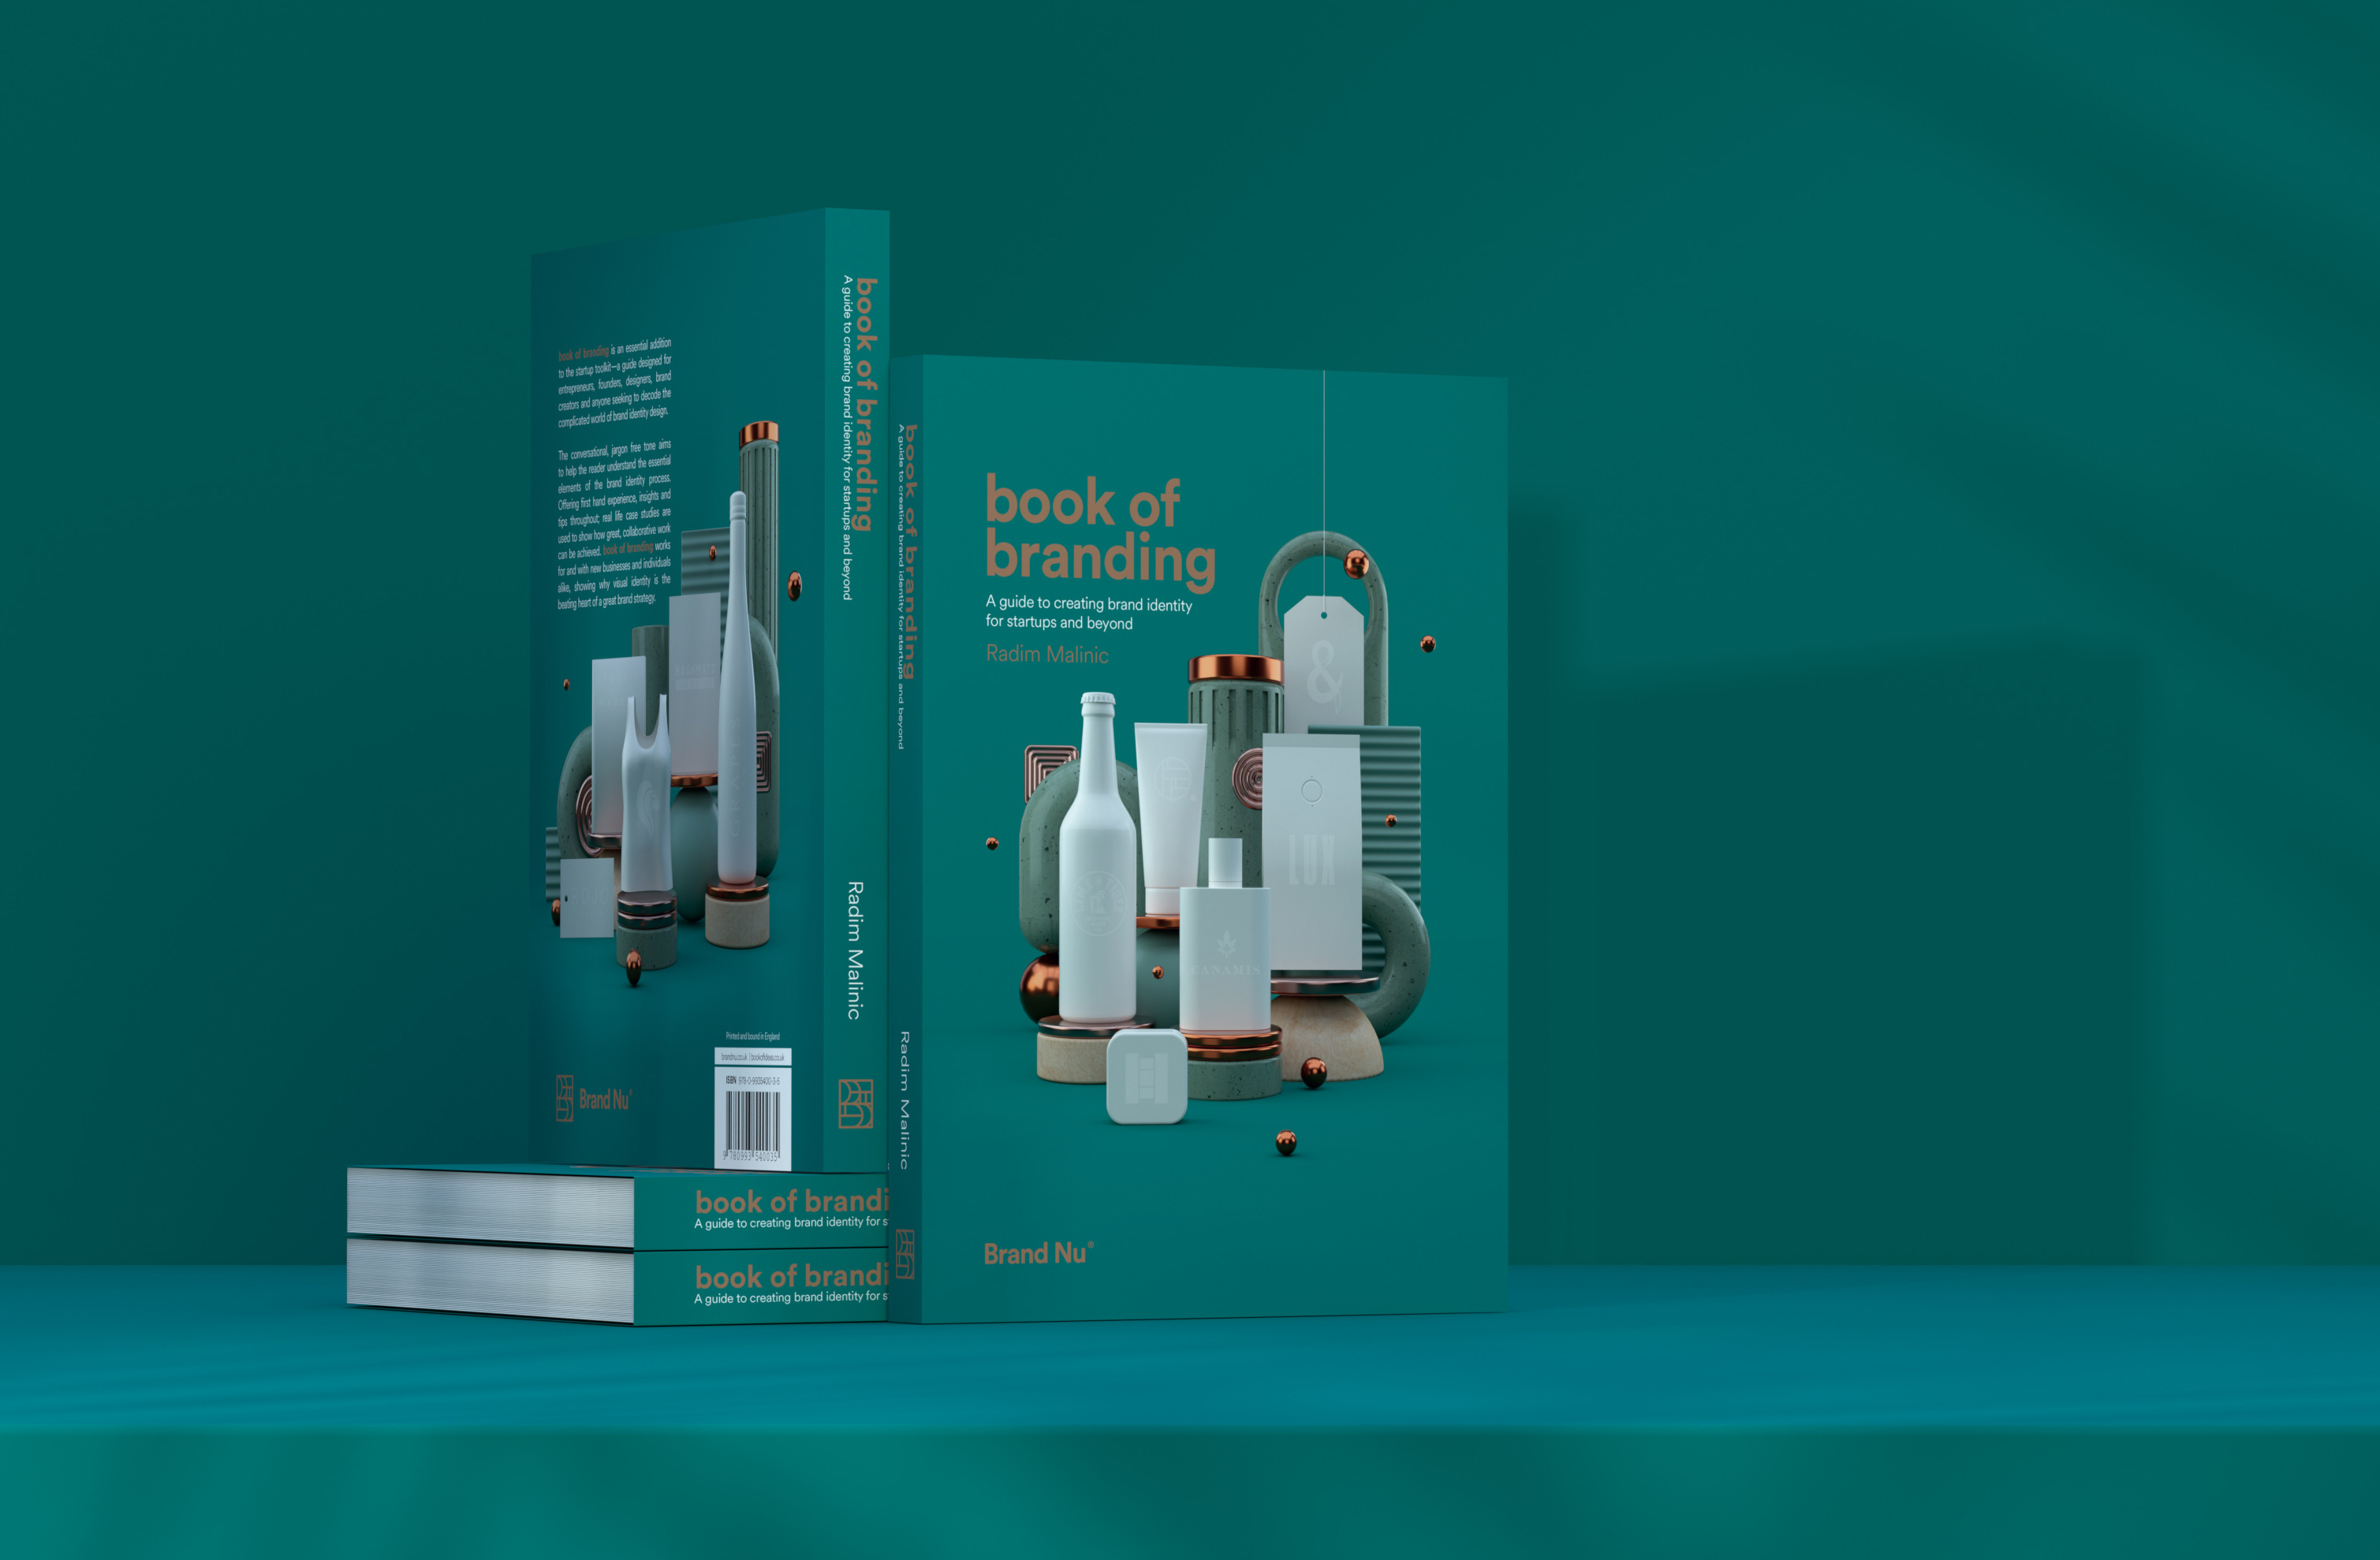 Introducing the Book of Branding, a guide for startups and beyond